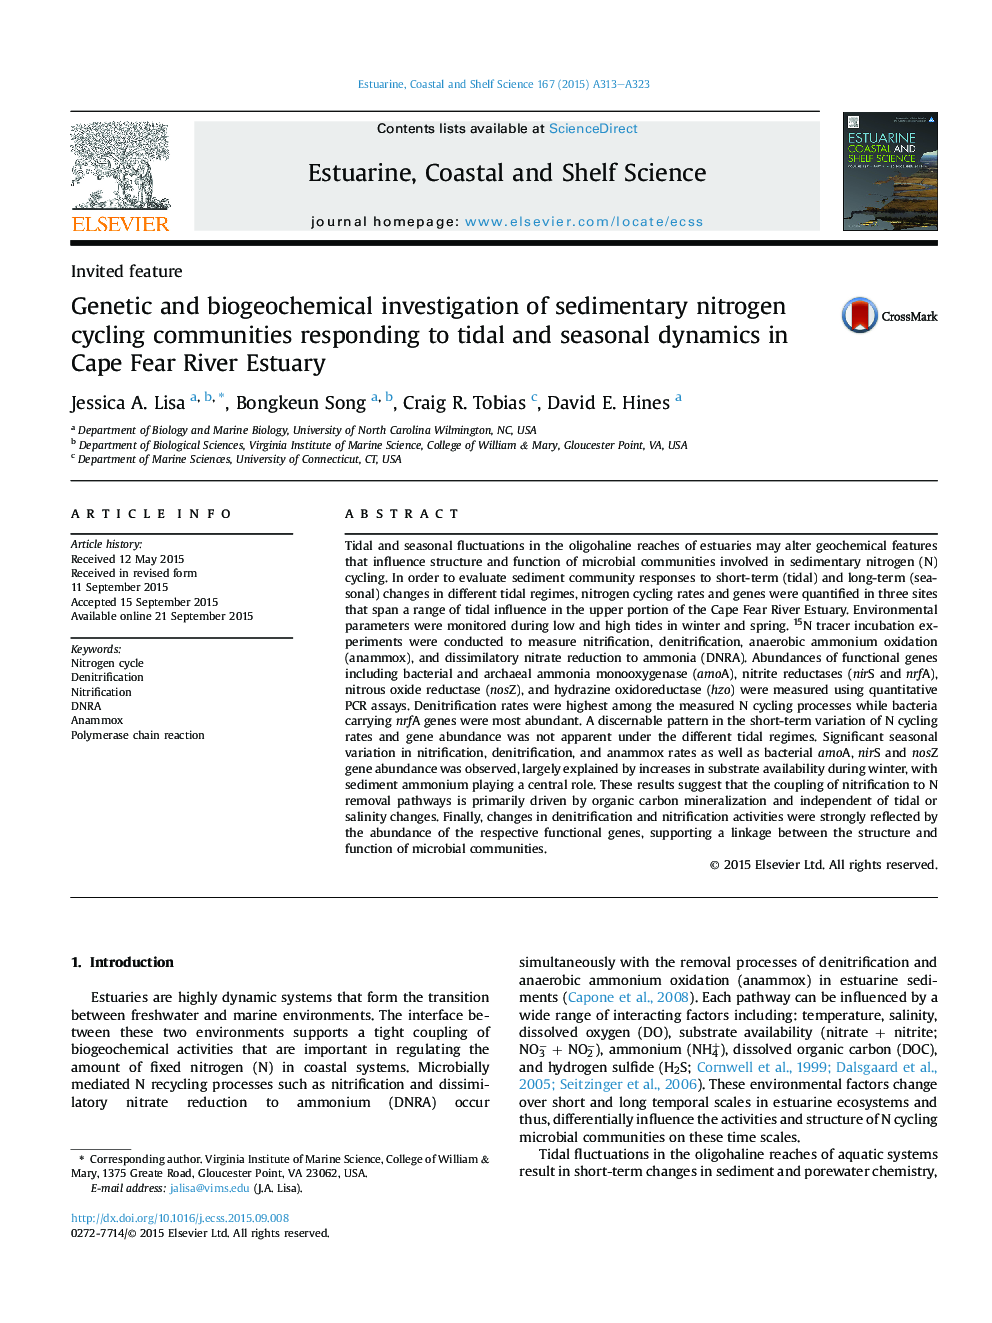 Genetic and biogeochemical investigation of sedimentary nitrogen cycling communities responding to tidal and seasonal dynamics in Cape Fear River Estuary